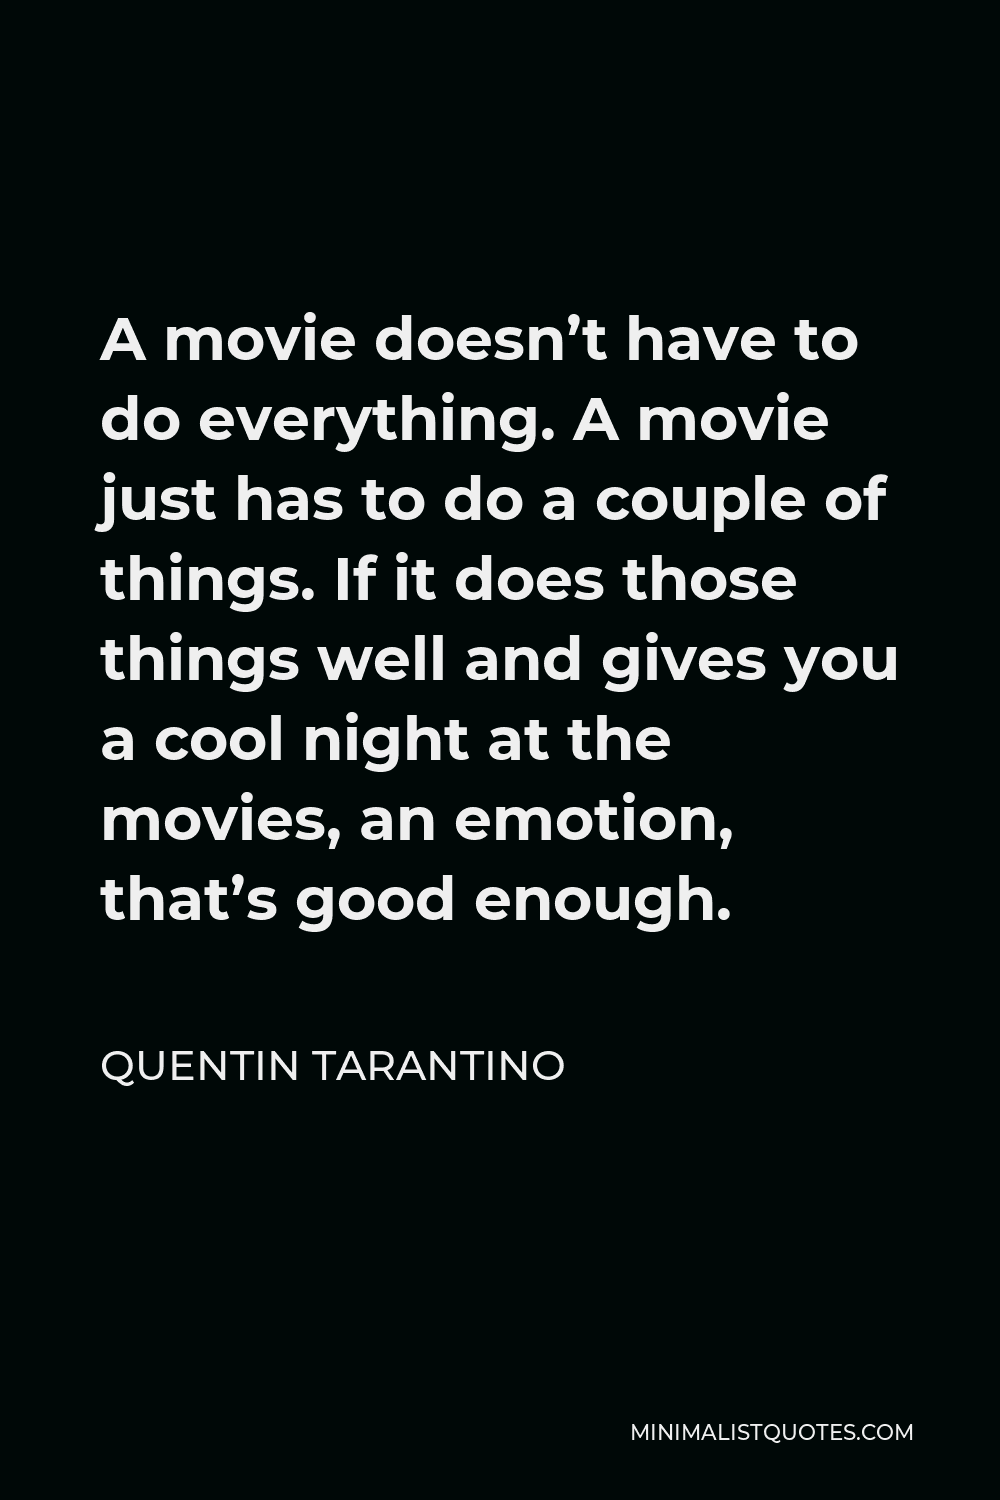 Quentin Tarantino Quote - A movie doesn’t have to do everything. A movie just has to do a couple of things. If it does those things well and gives you a cool night at the movies, an emotion, that’s good enough.